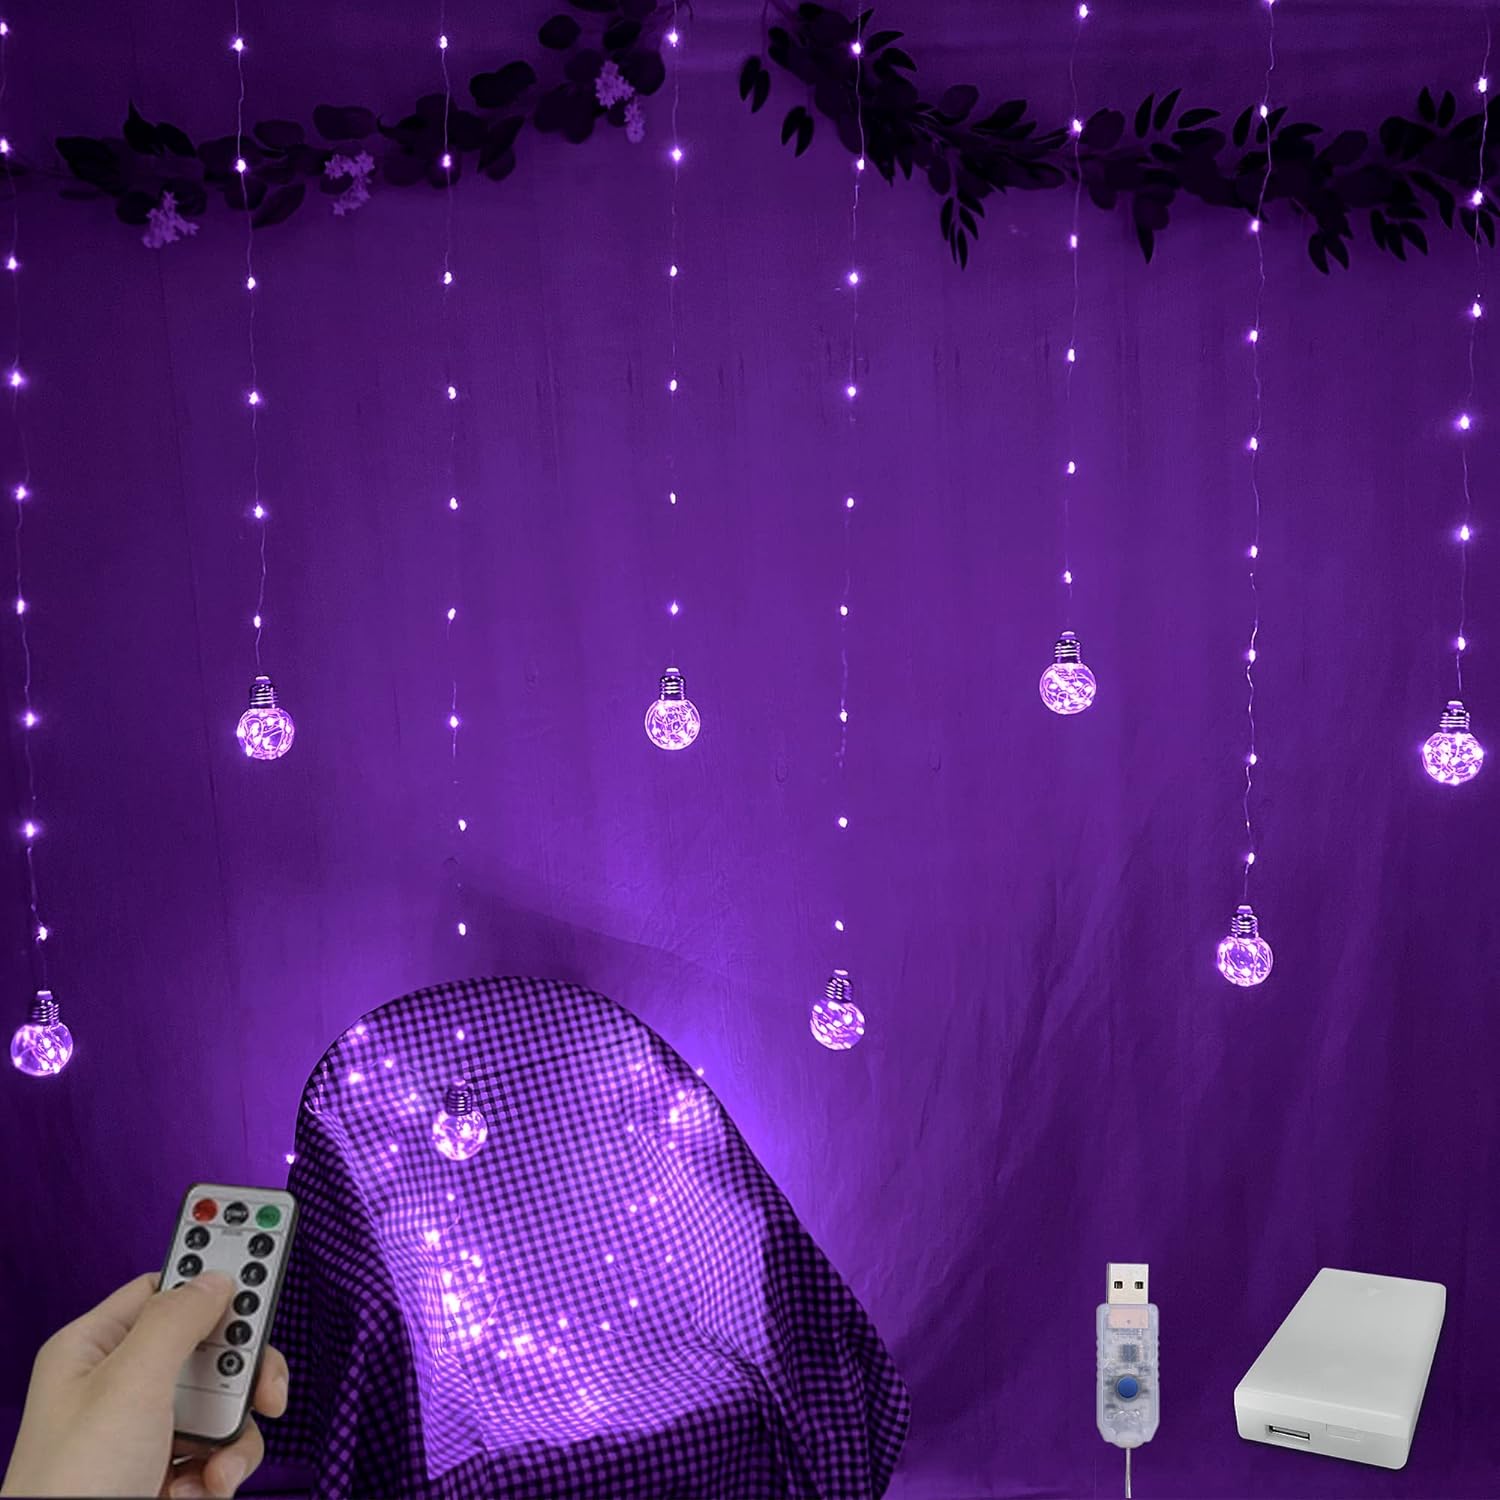 Wishing Ball Curtain Lights 200 LED Window Curtain String Lights with Remote, USB Battery Powered Twinkle Globe Fairy Lights for Wedding Party Bedroom Halloween Christmas Decoration (Purple)